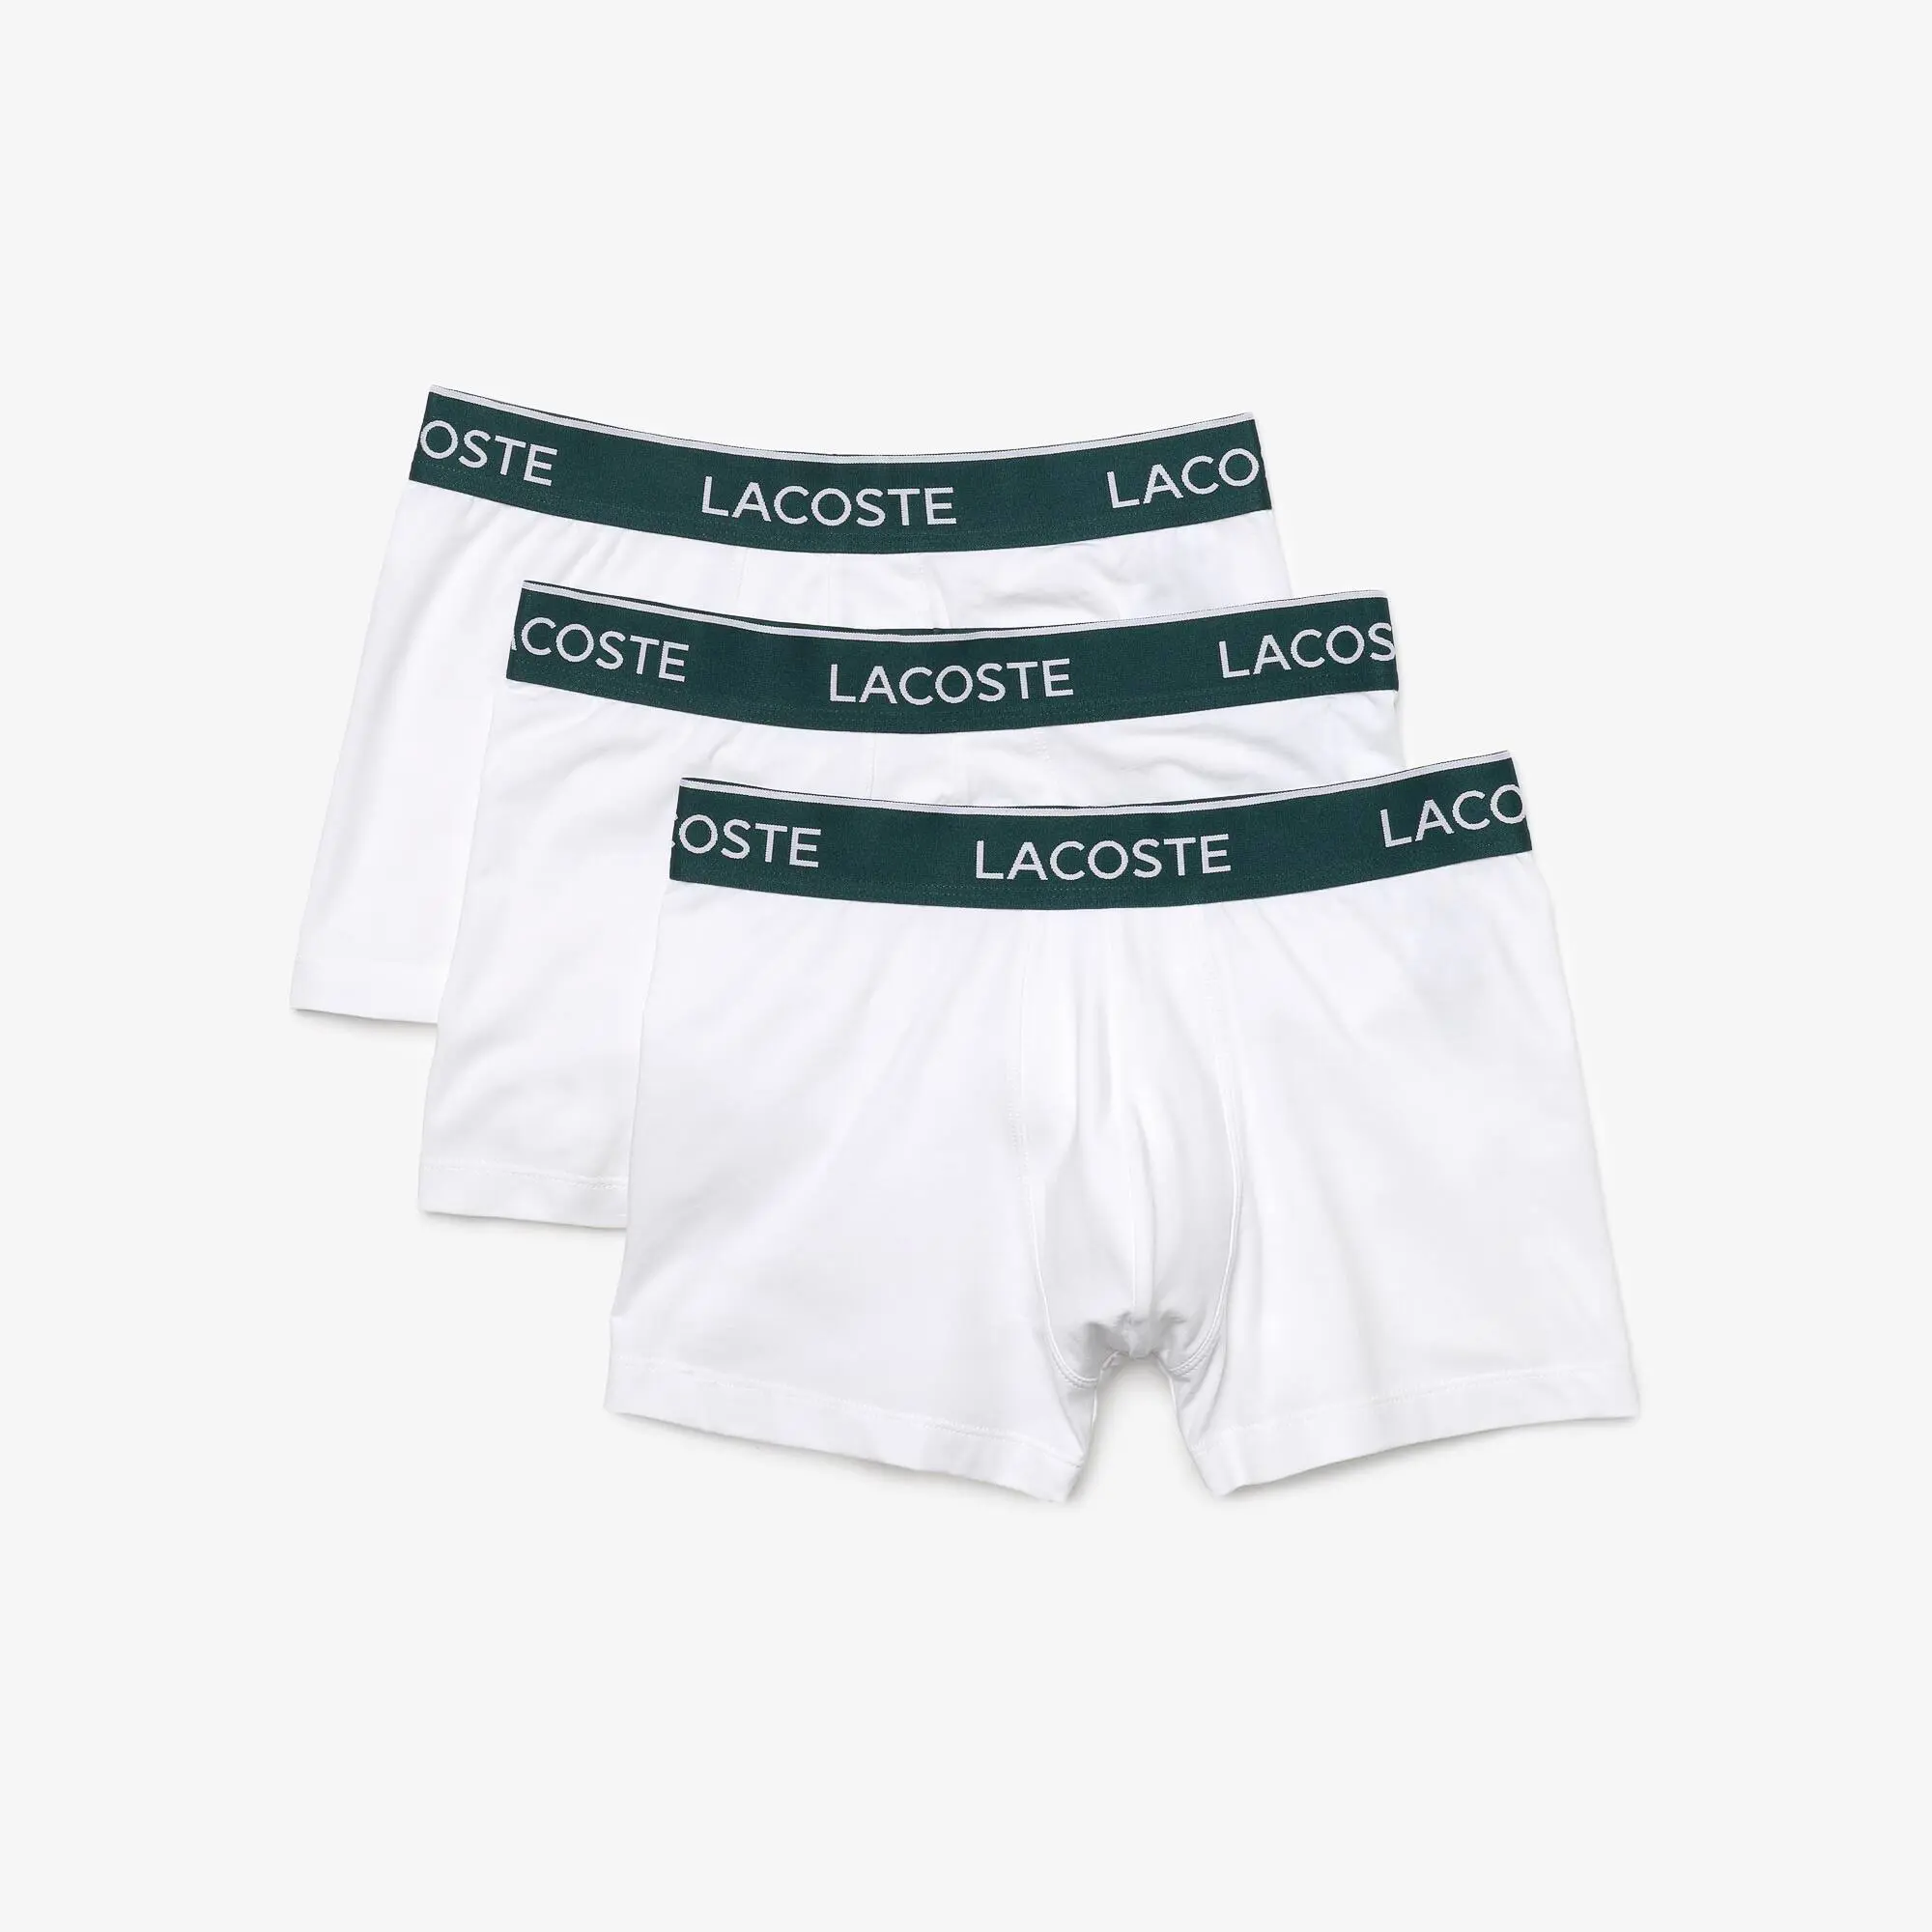 Lacoste Pack Of 3 Casual Black Trunks. 2